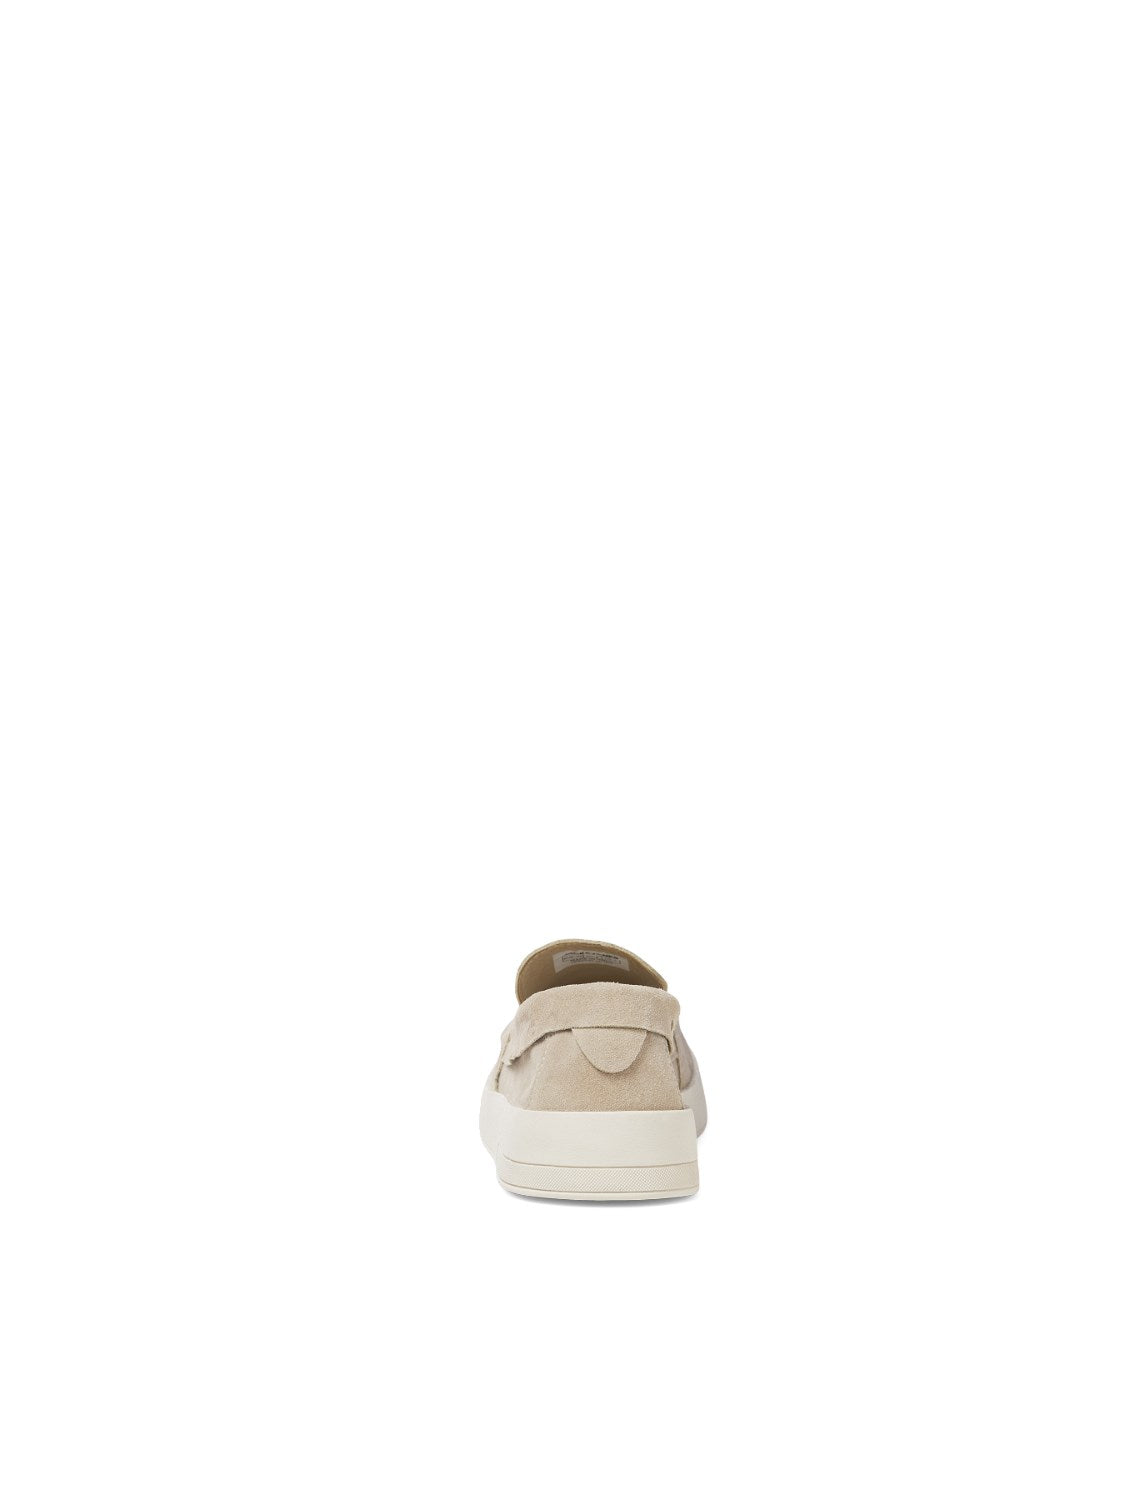 Loafers Maccartney, plaza taupe